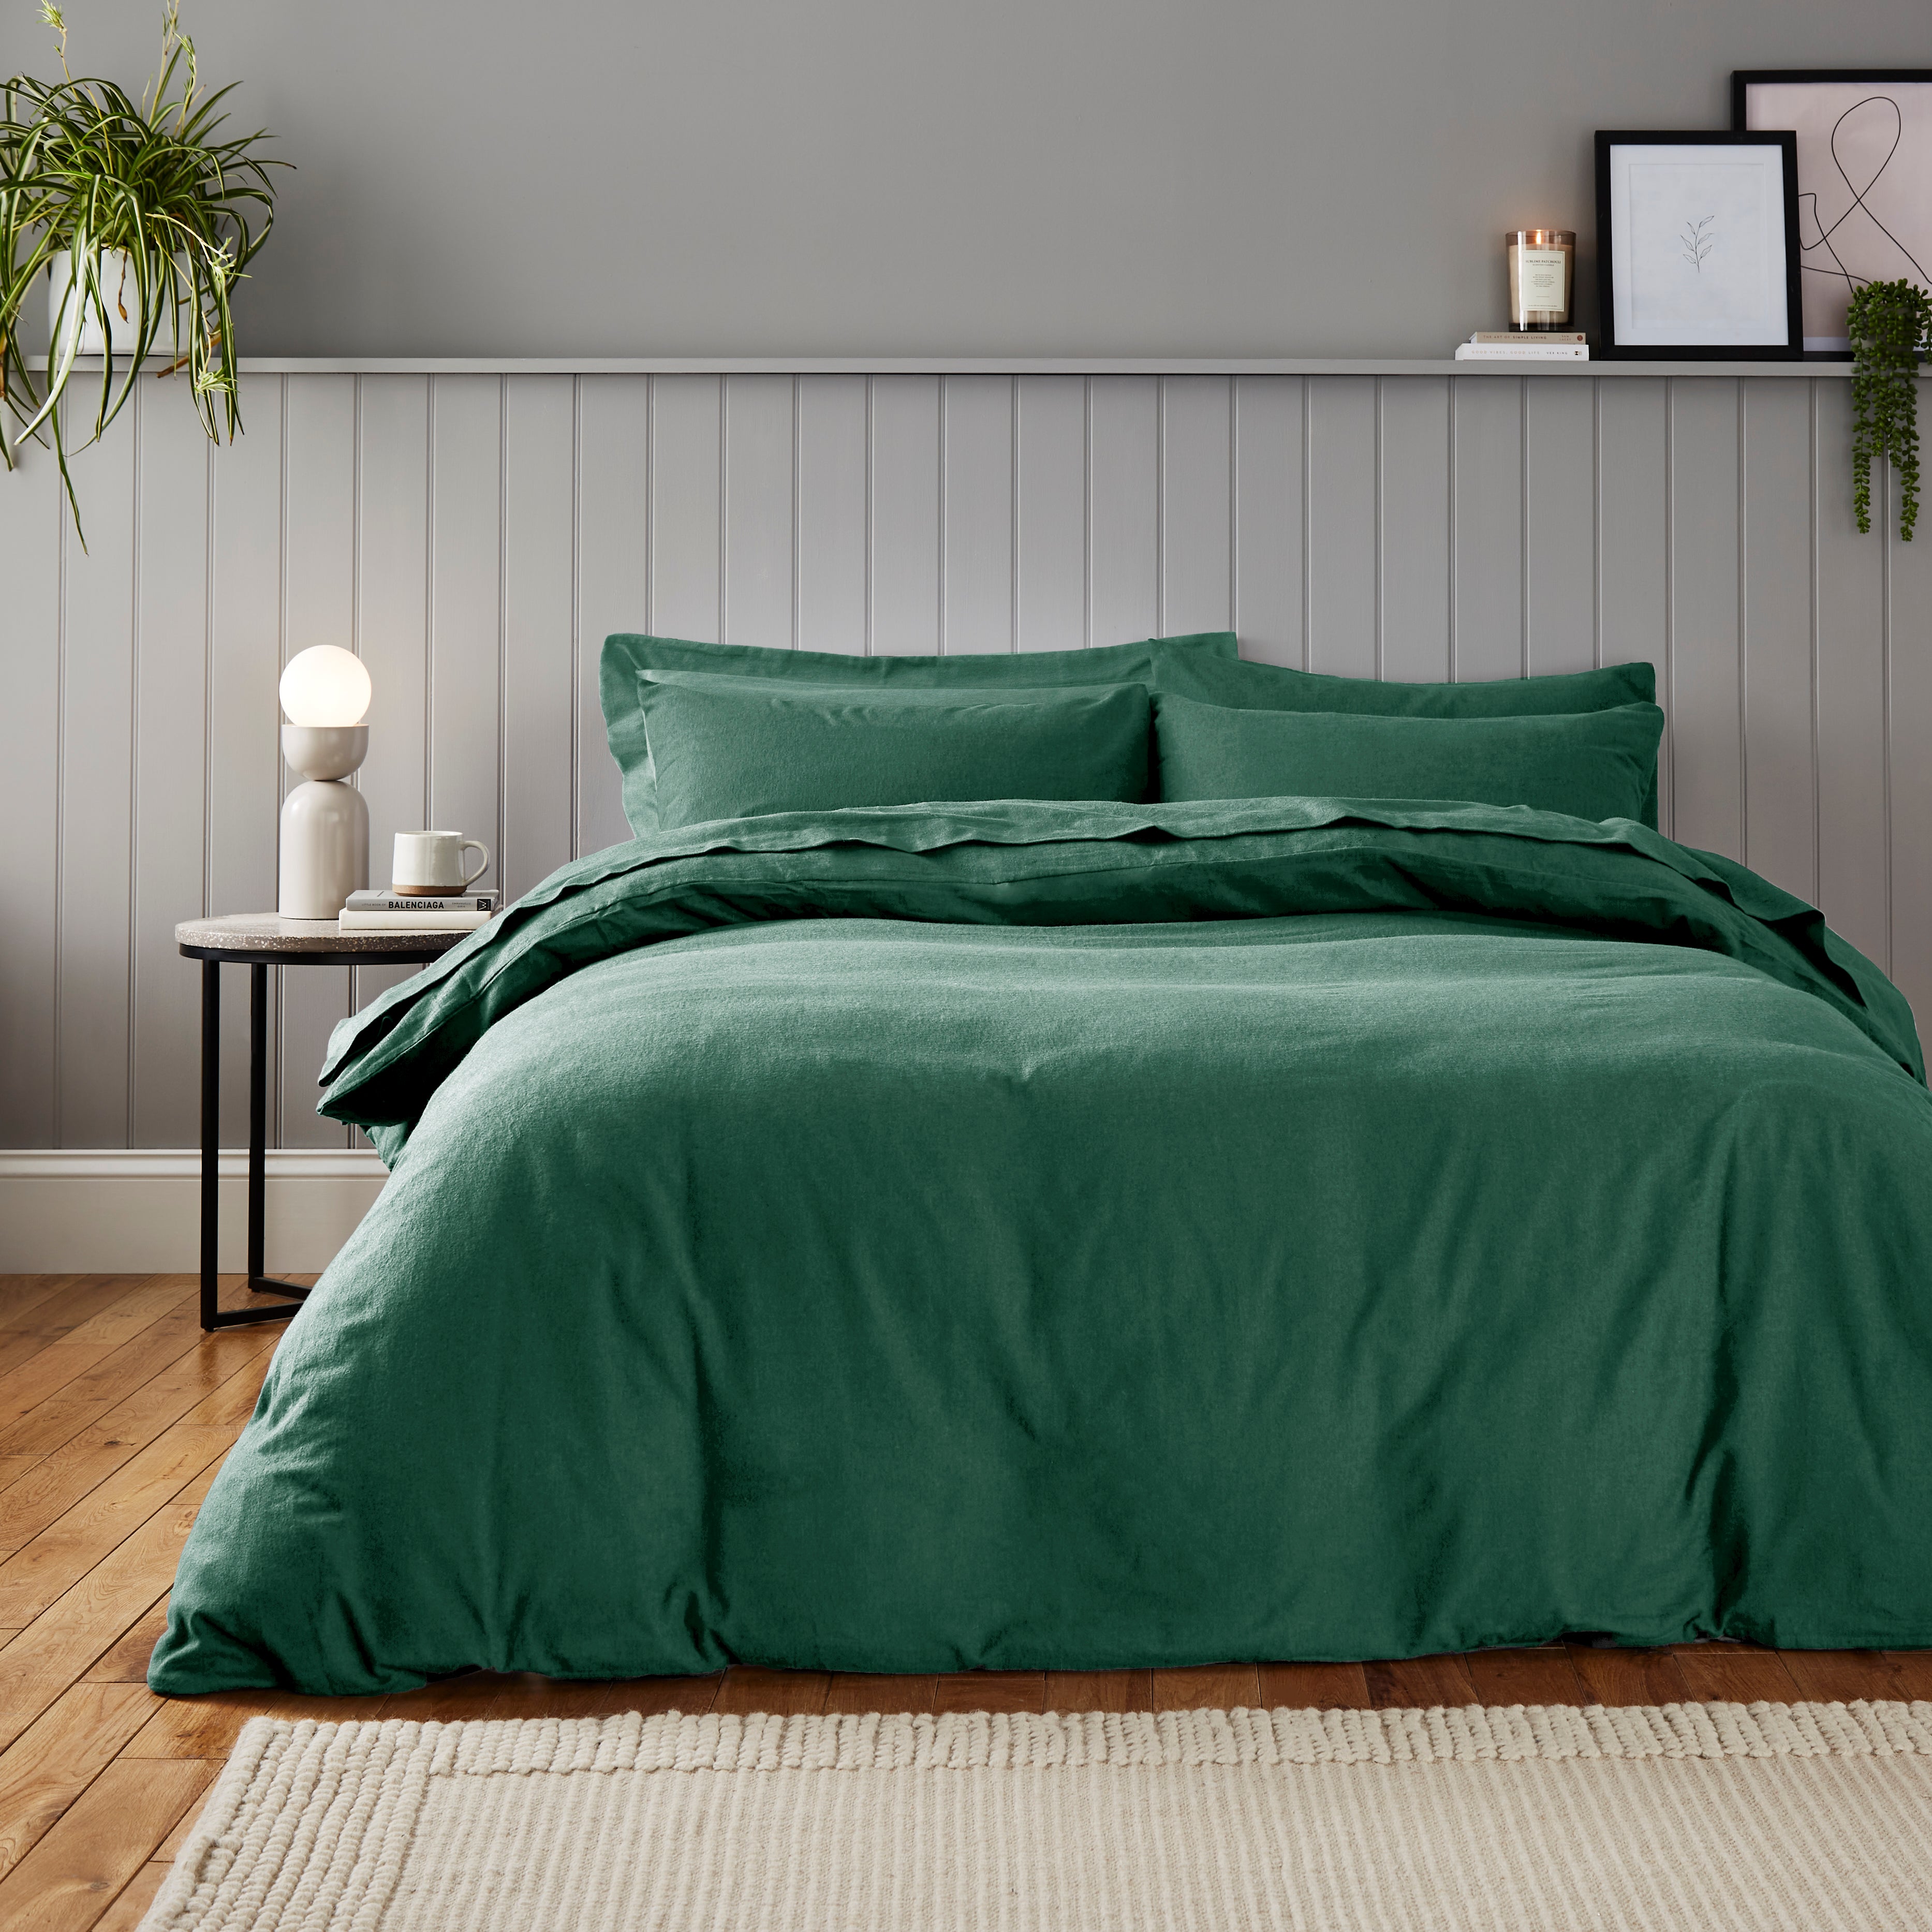 Soft Cosy Luxury Brushed Cotton Duvet Cover And Pillowcase Set Emerald Green